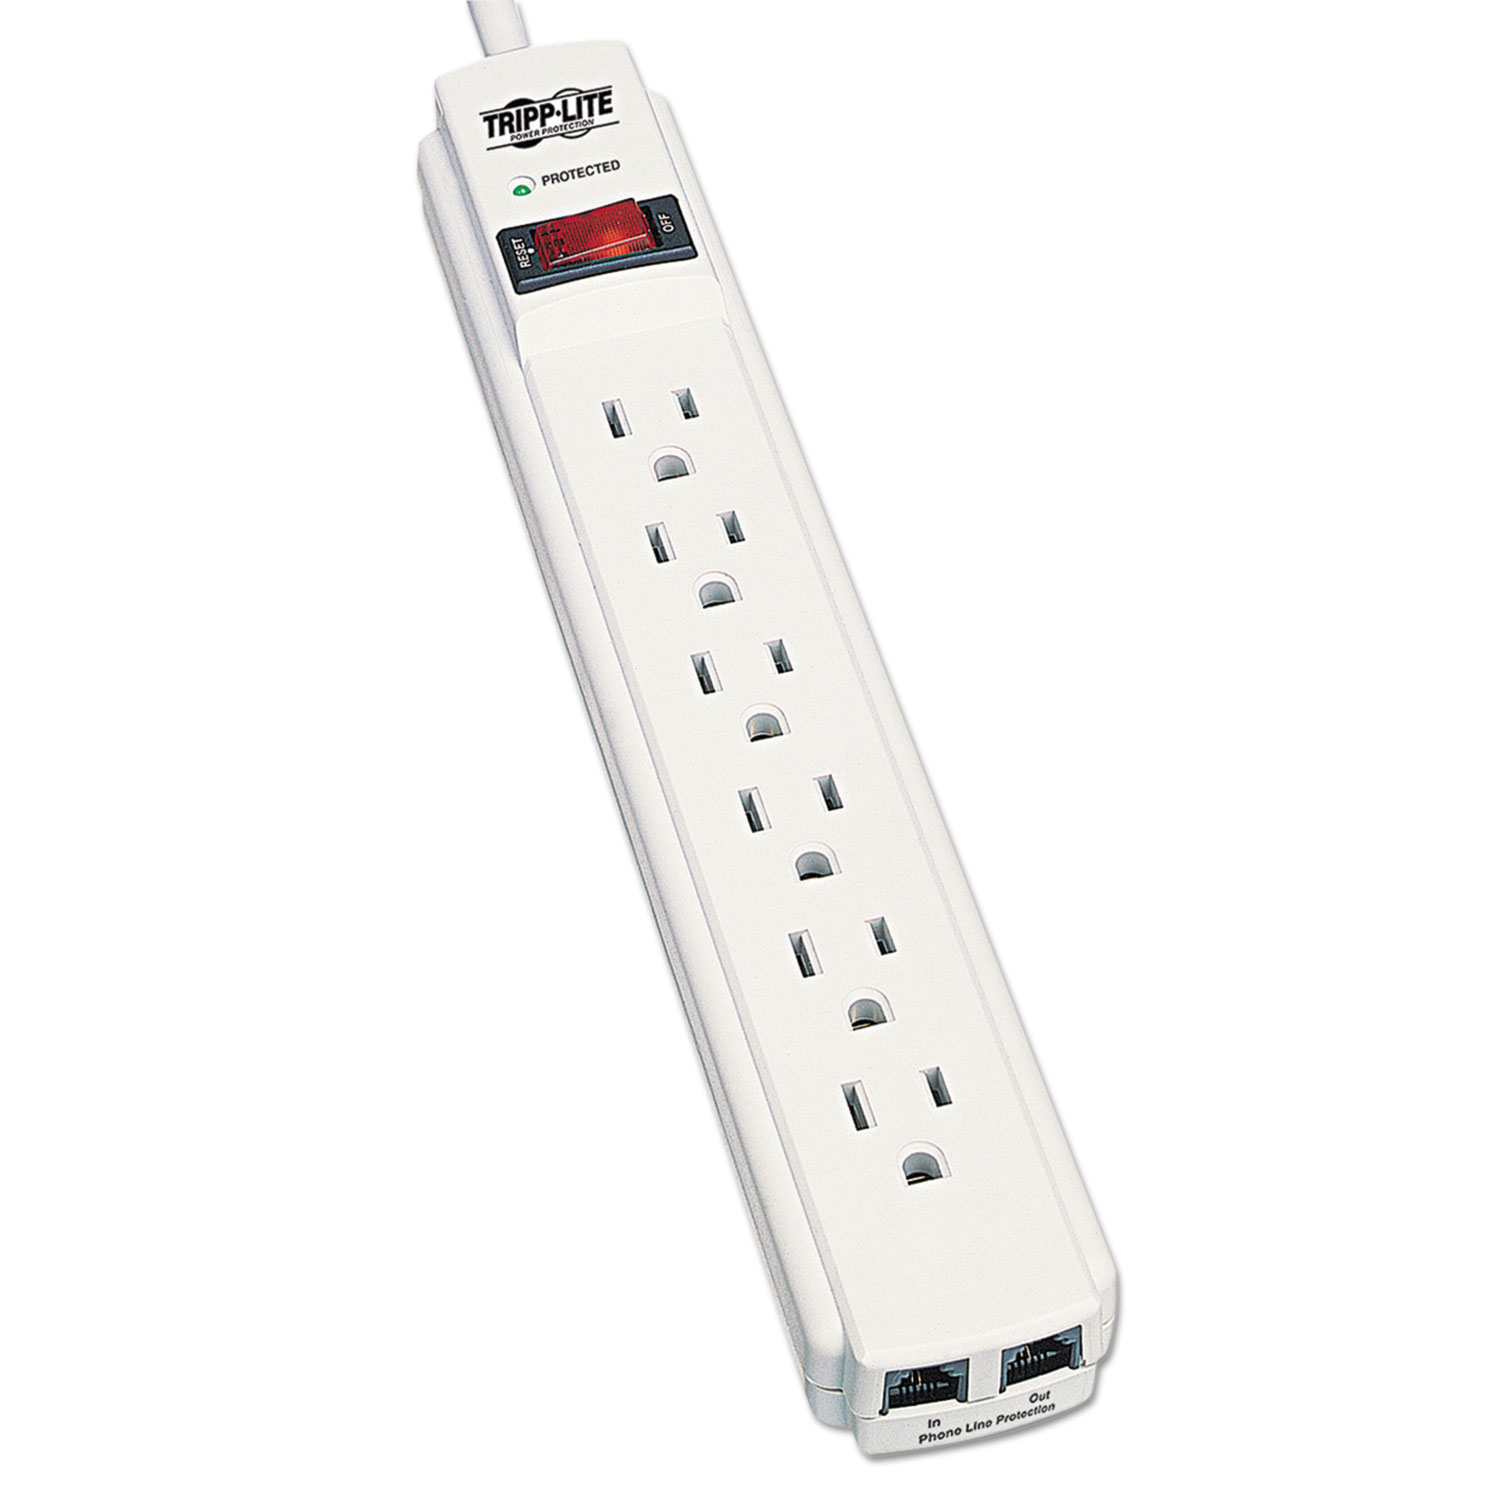  Tripp Lite TLP604TEL Protect It! Surge Protector, 6 Outlets, 4 ft. Cord, 790 Joules, RJ11, Light Gray (TRPTLP604TEL) 